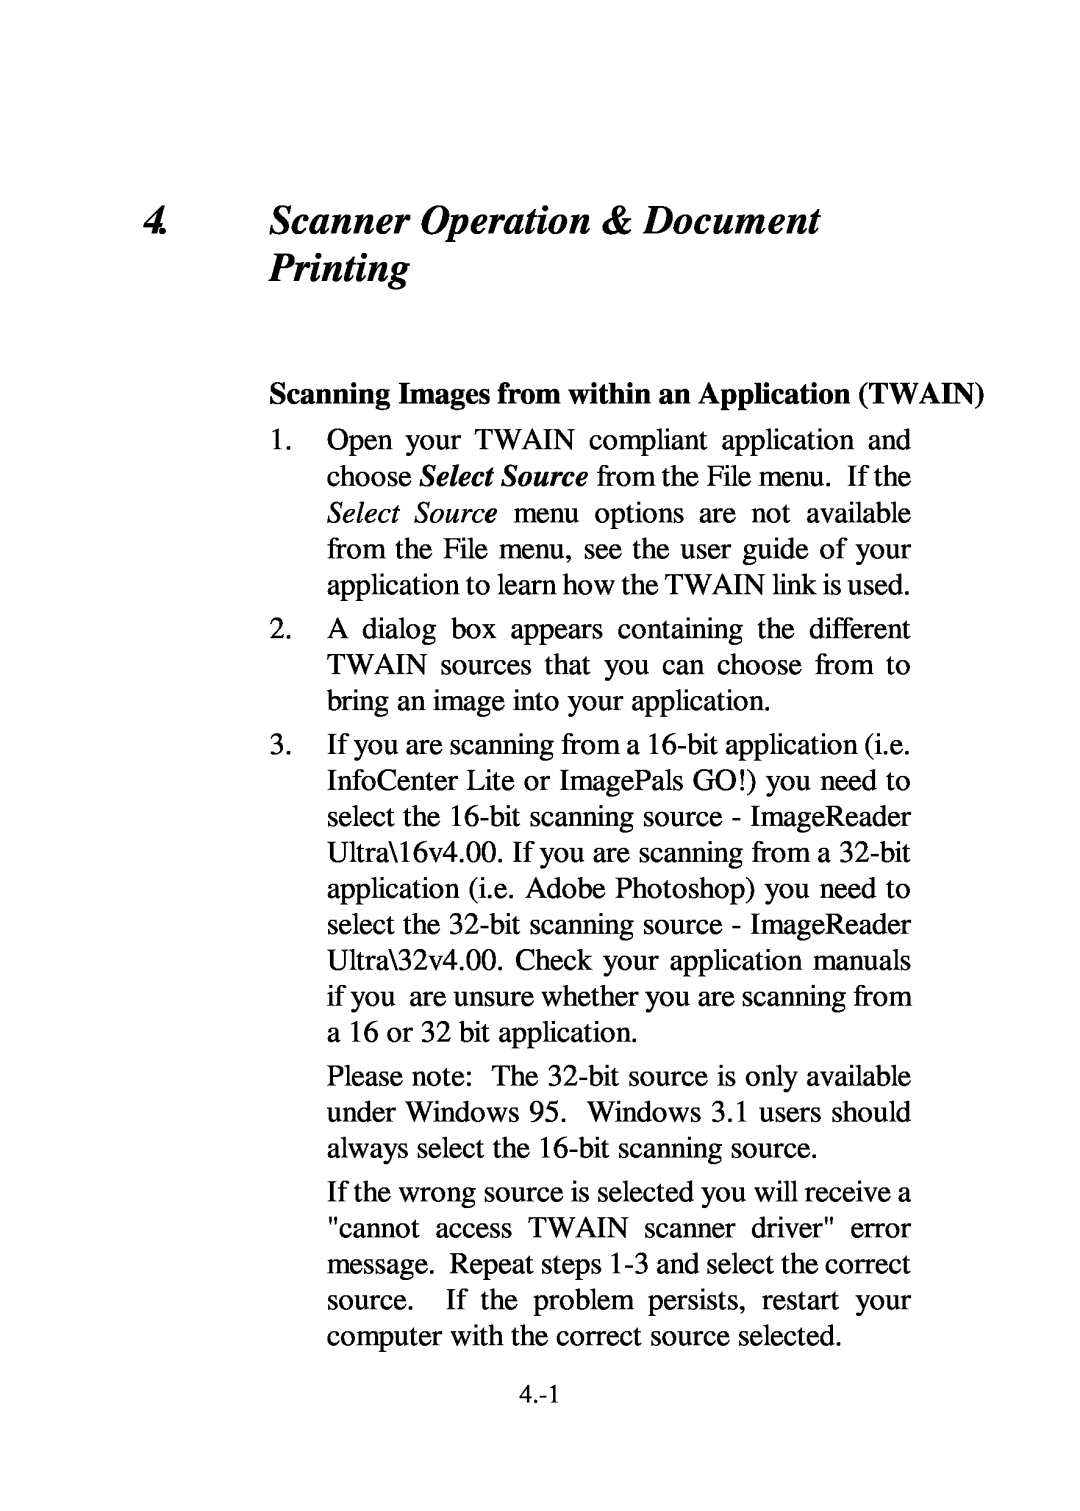 IBM Ricoh FB735 user manual Scanner Operation & Document Printing, Scanning Images from within an Application TWAIN 